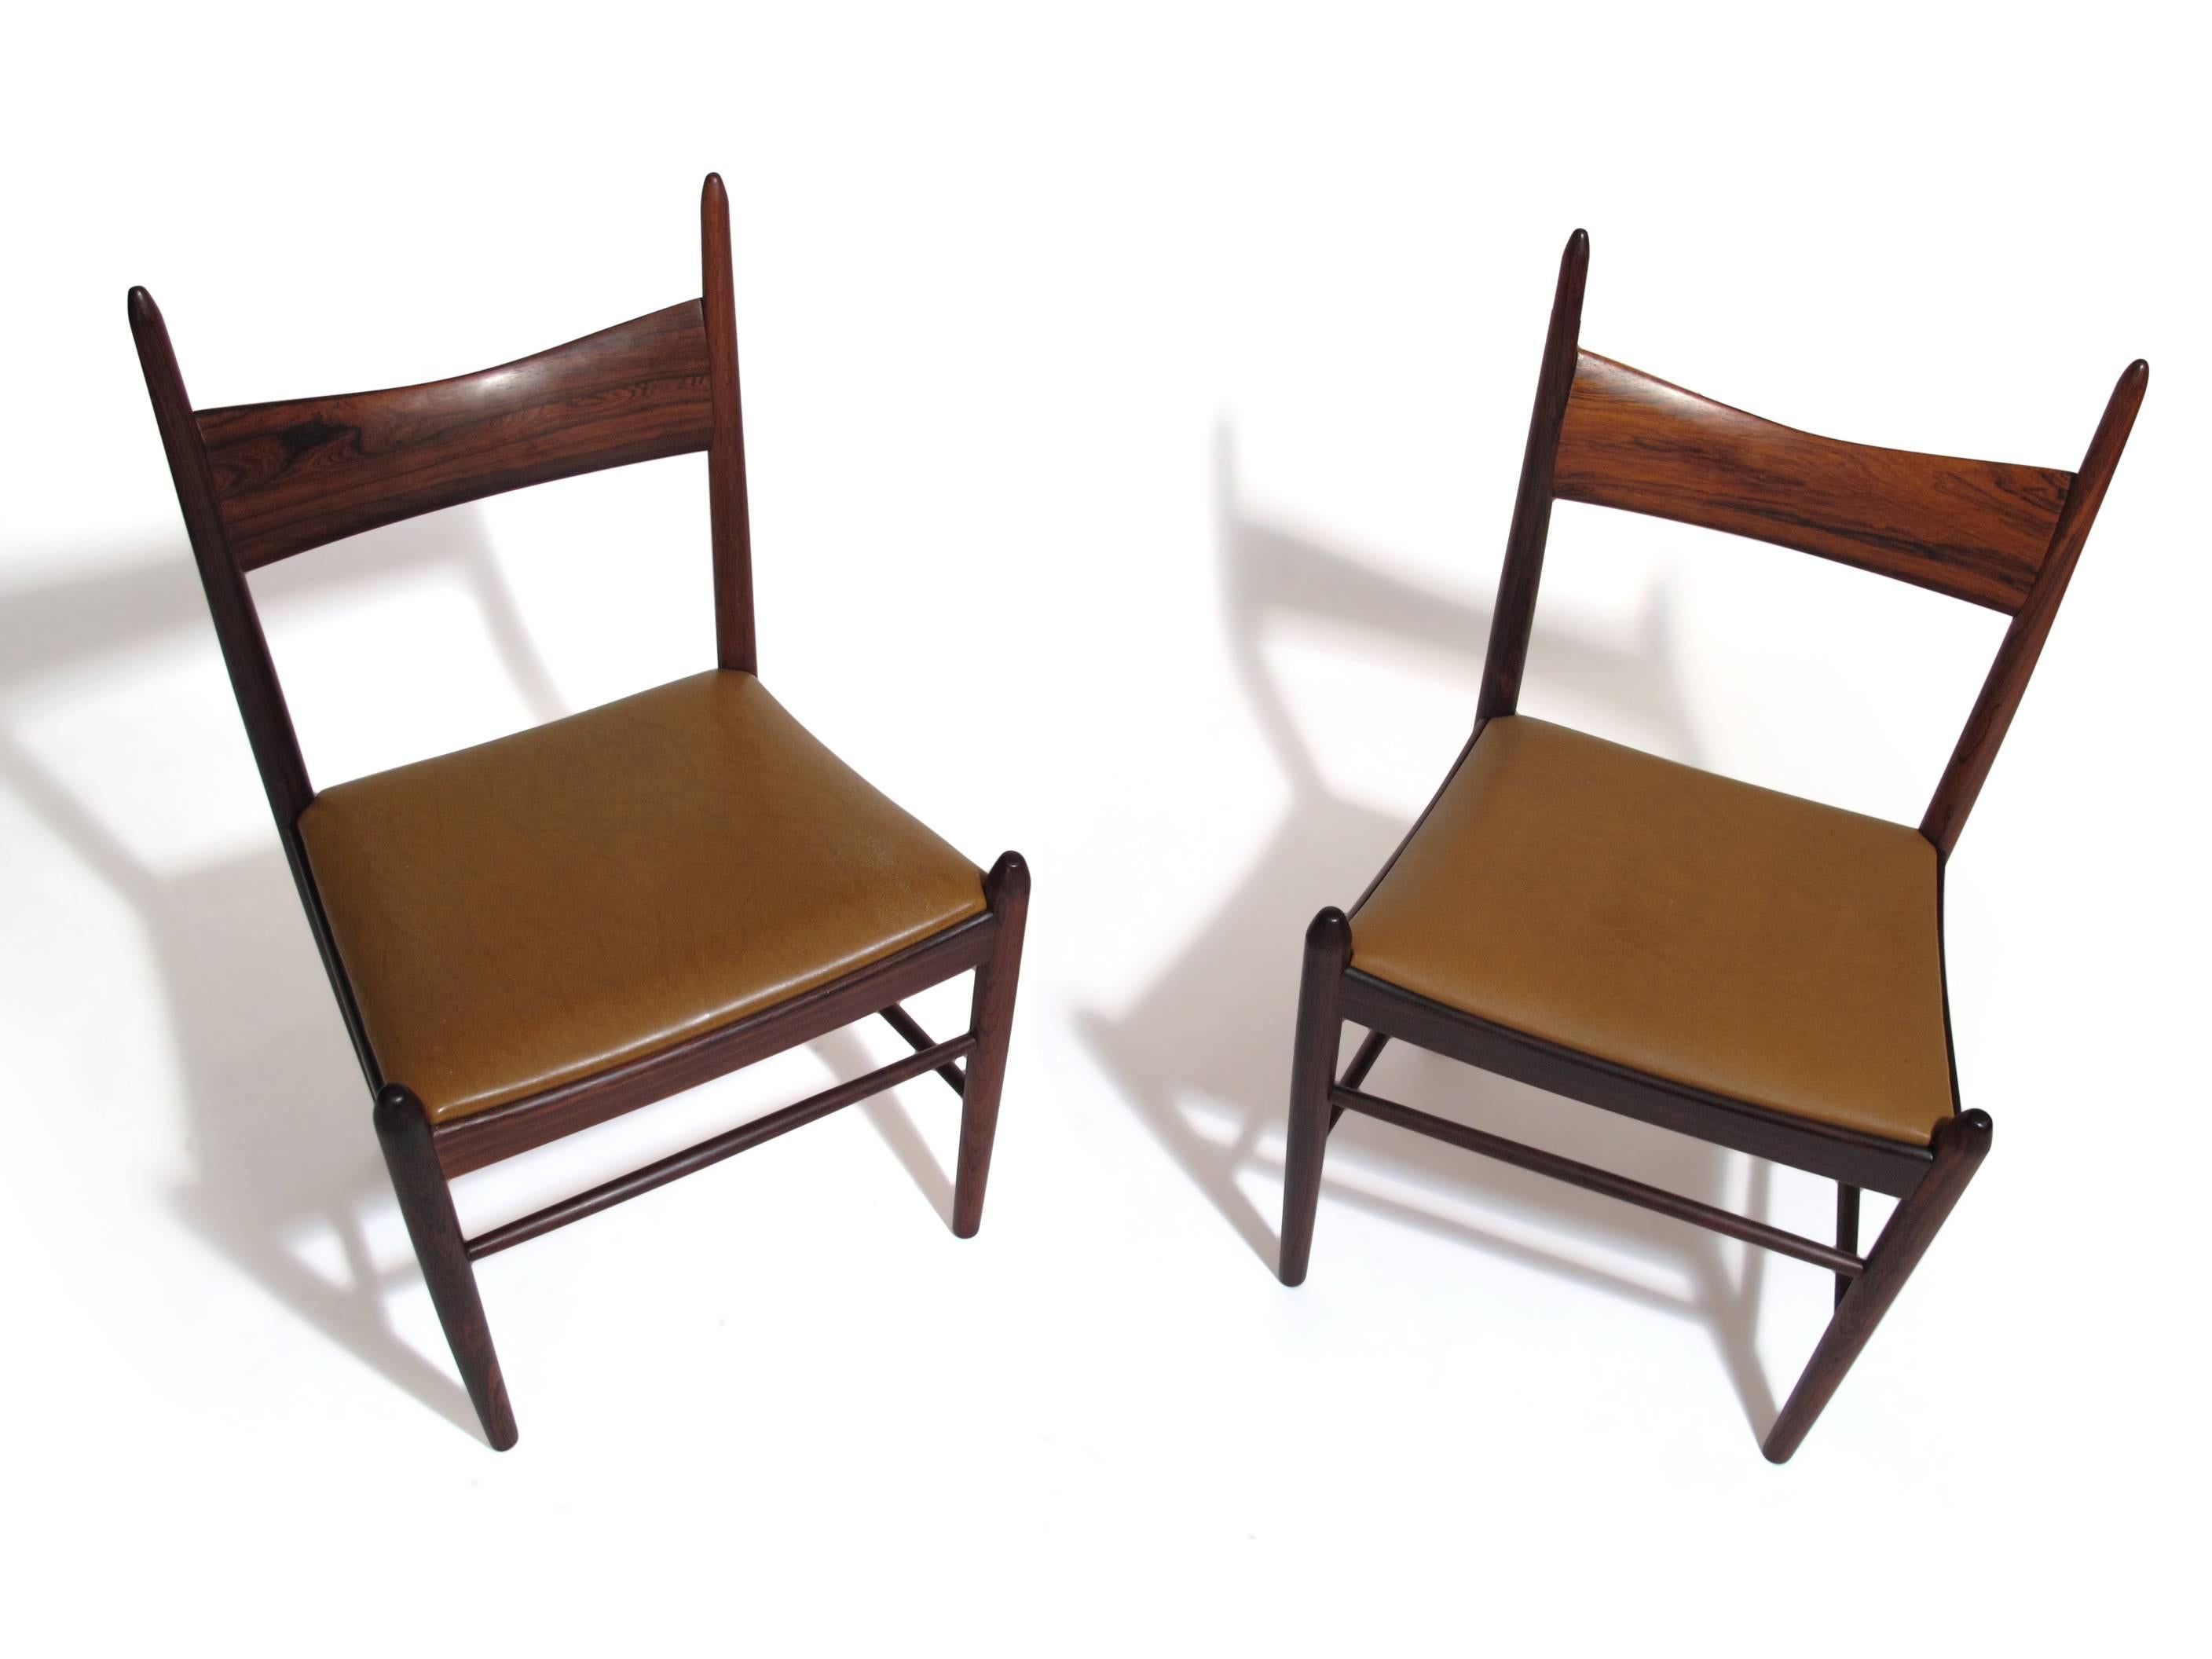 Rosewood dining chairs designed by Vestervig Eriksen for Brdr, Tromborg, Denmark. Handcrafted solid Brazilian rosewood with sculpted back and turned legs. Strong construction and sturdy. 16 available.

Price includes upholstery in choice of material.